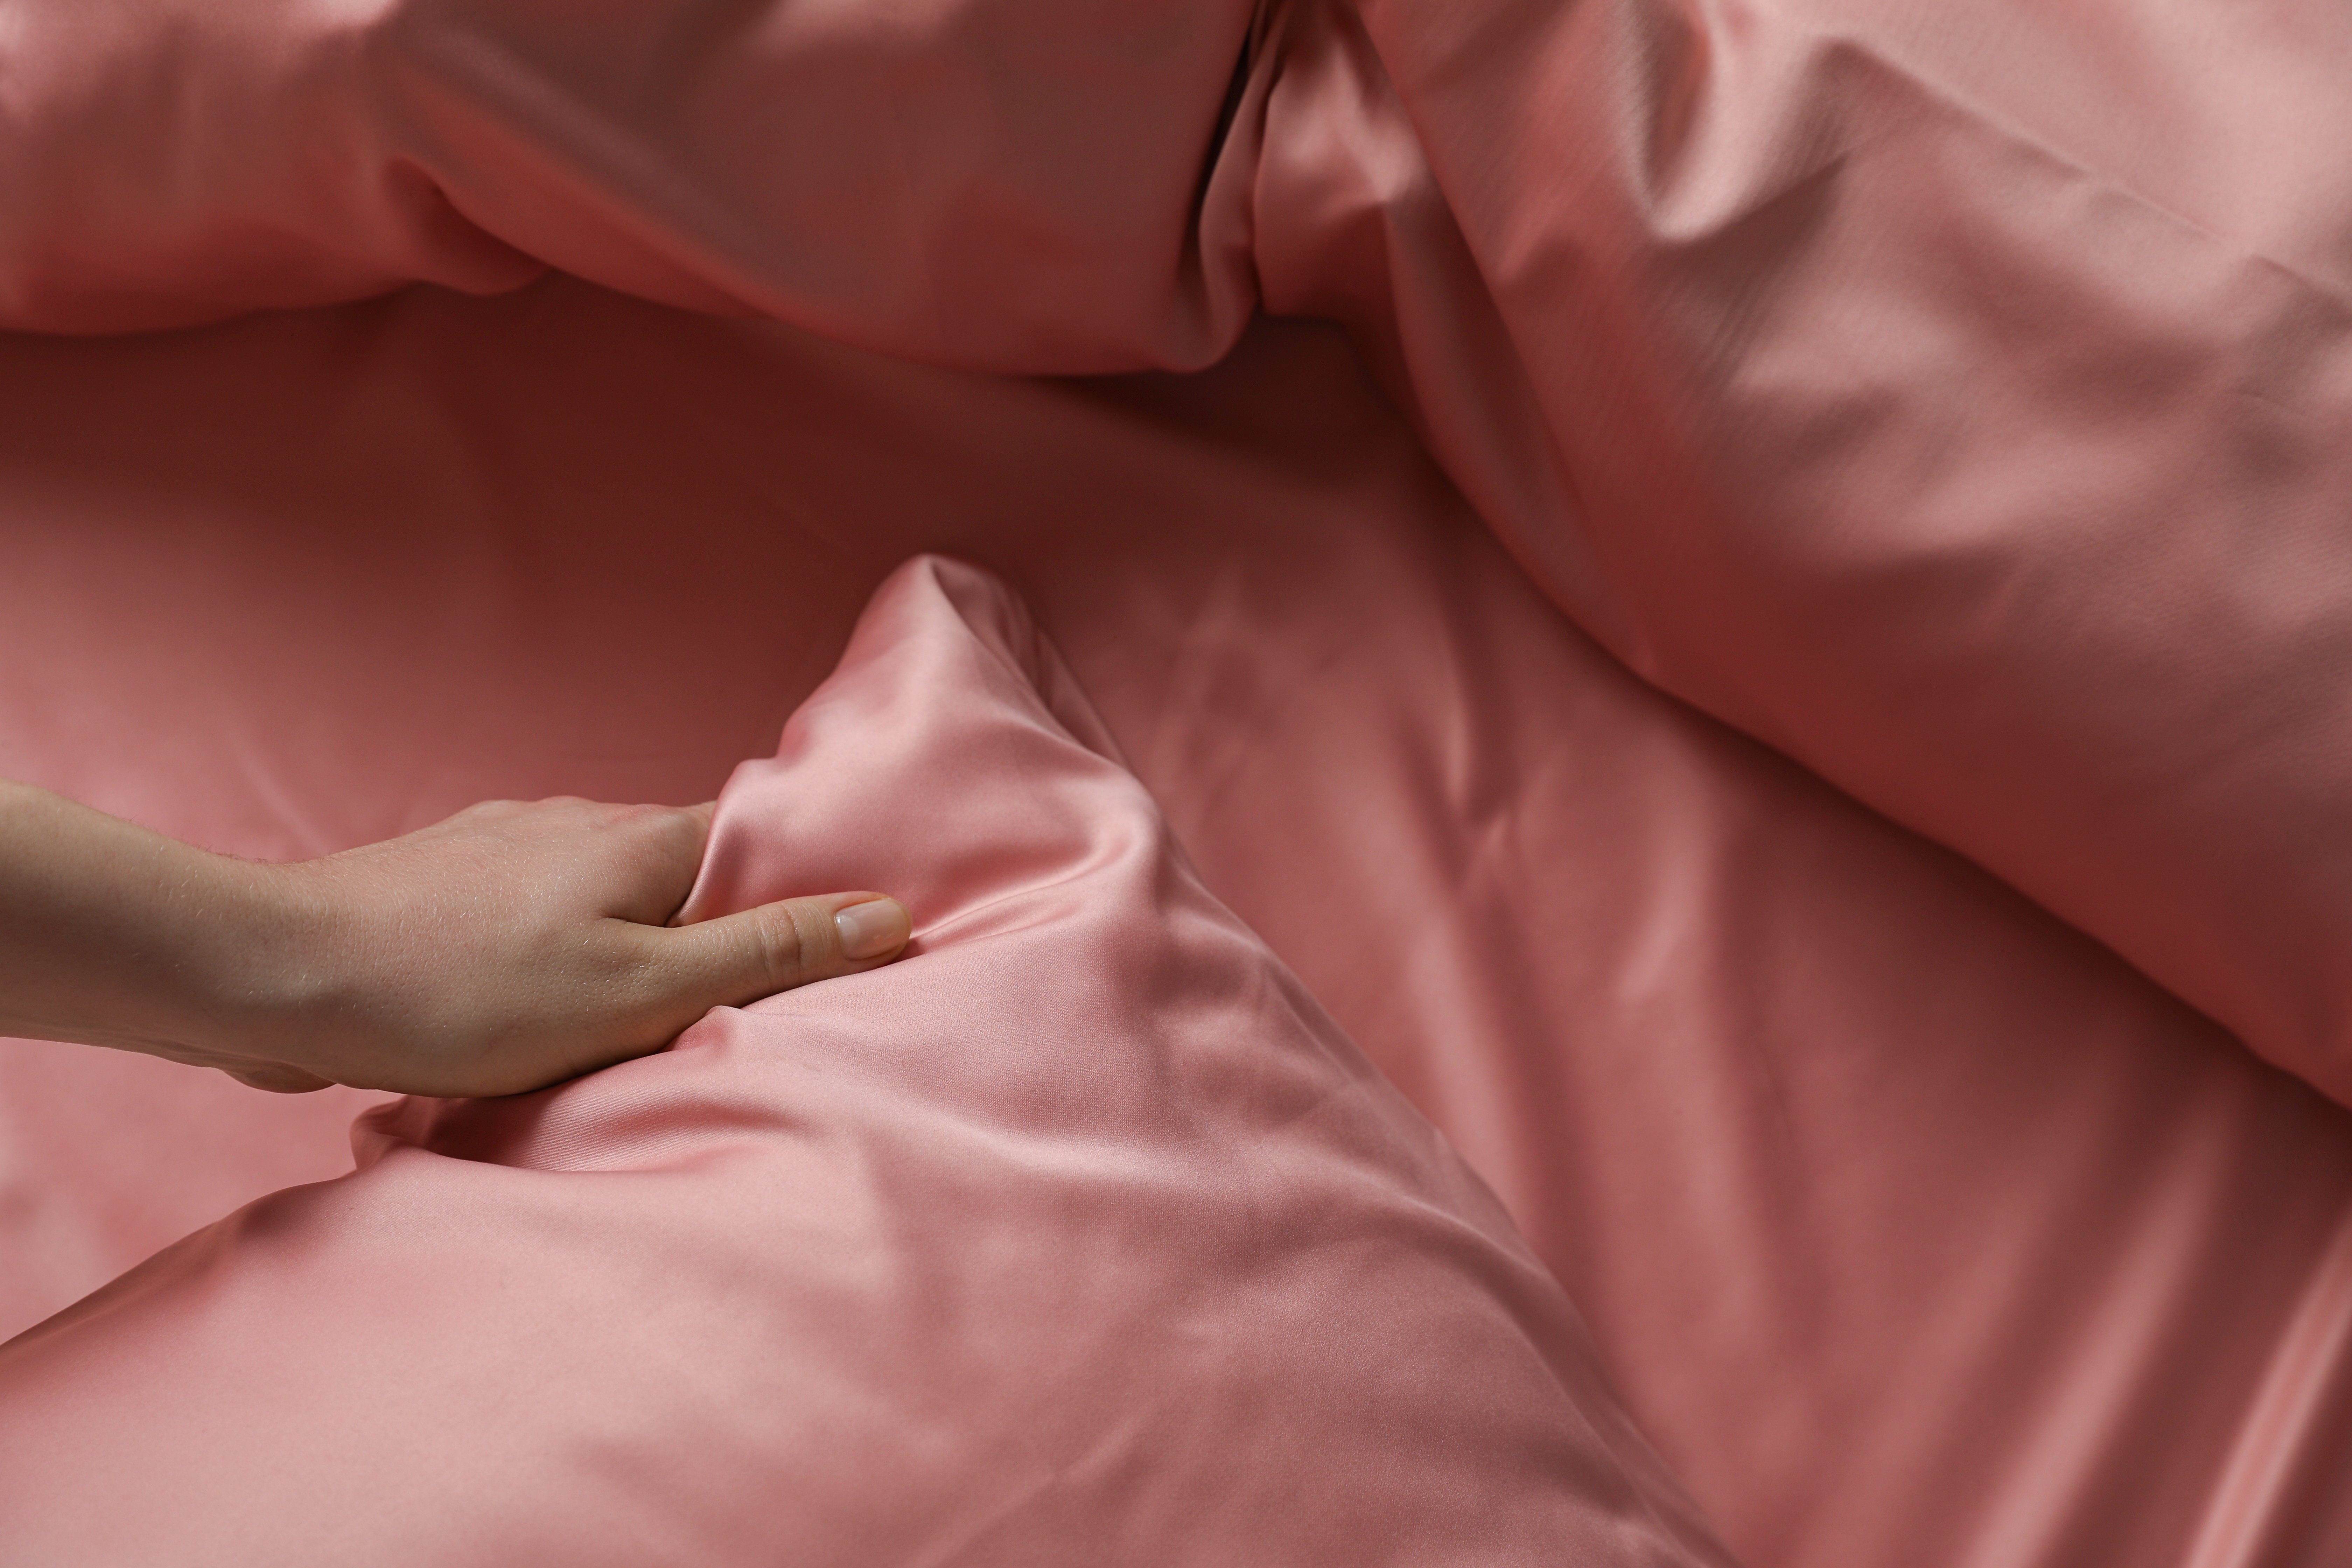 Woman with satin pillowcases and bed sheets. | Source: Getty Images